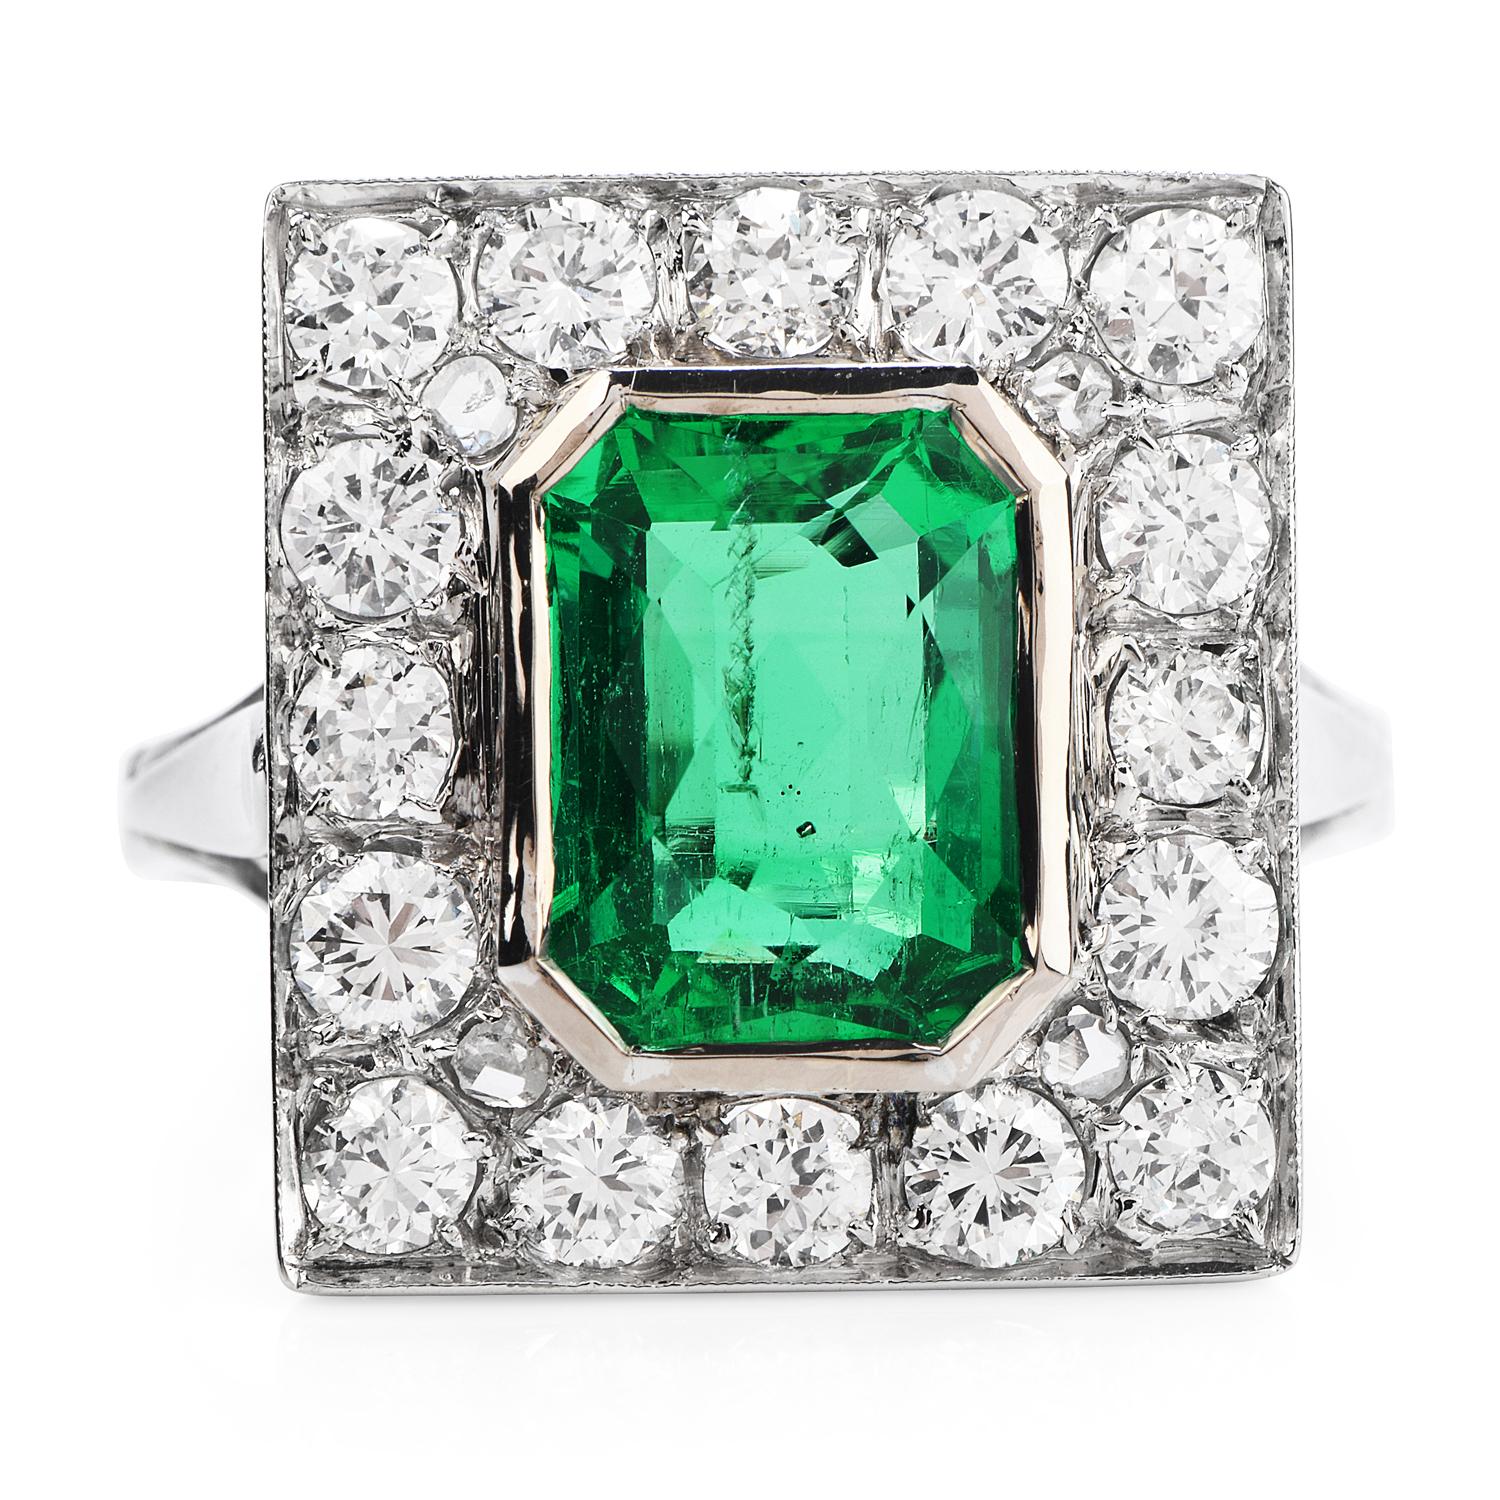 This Rare Emerald set inside a vintage late 1950's solid platinum mounting designed as a rectangular plaque, weighing approx 3.94 carats GIA certified to be without any treatments. This highly sparkling gem surrounded by 20 extra white